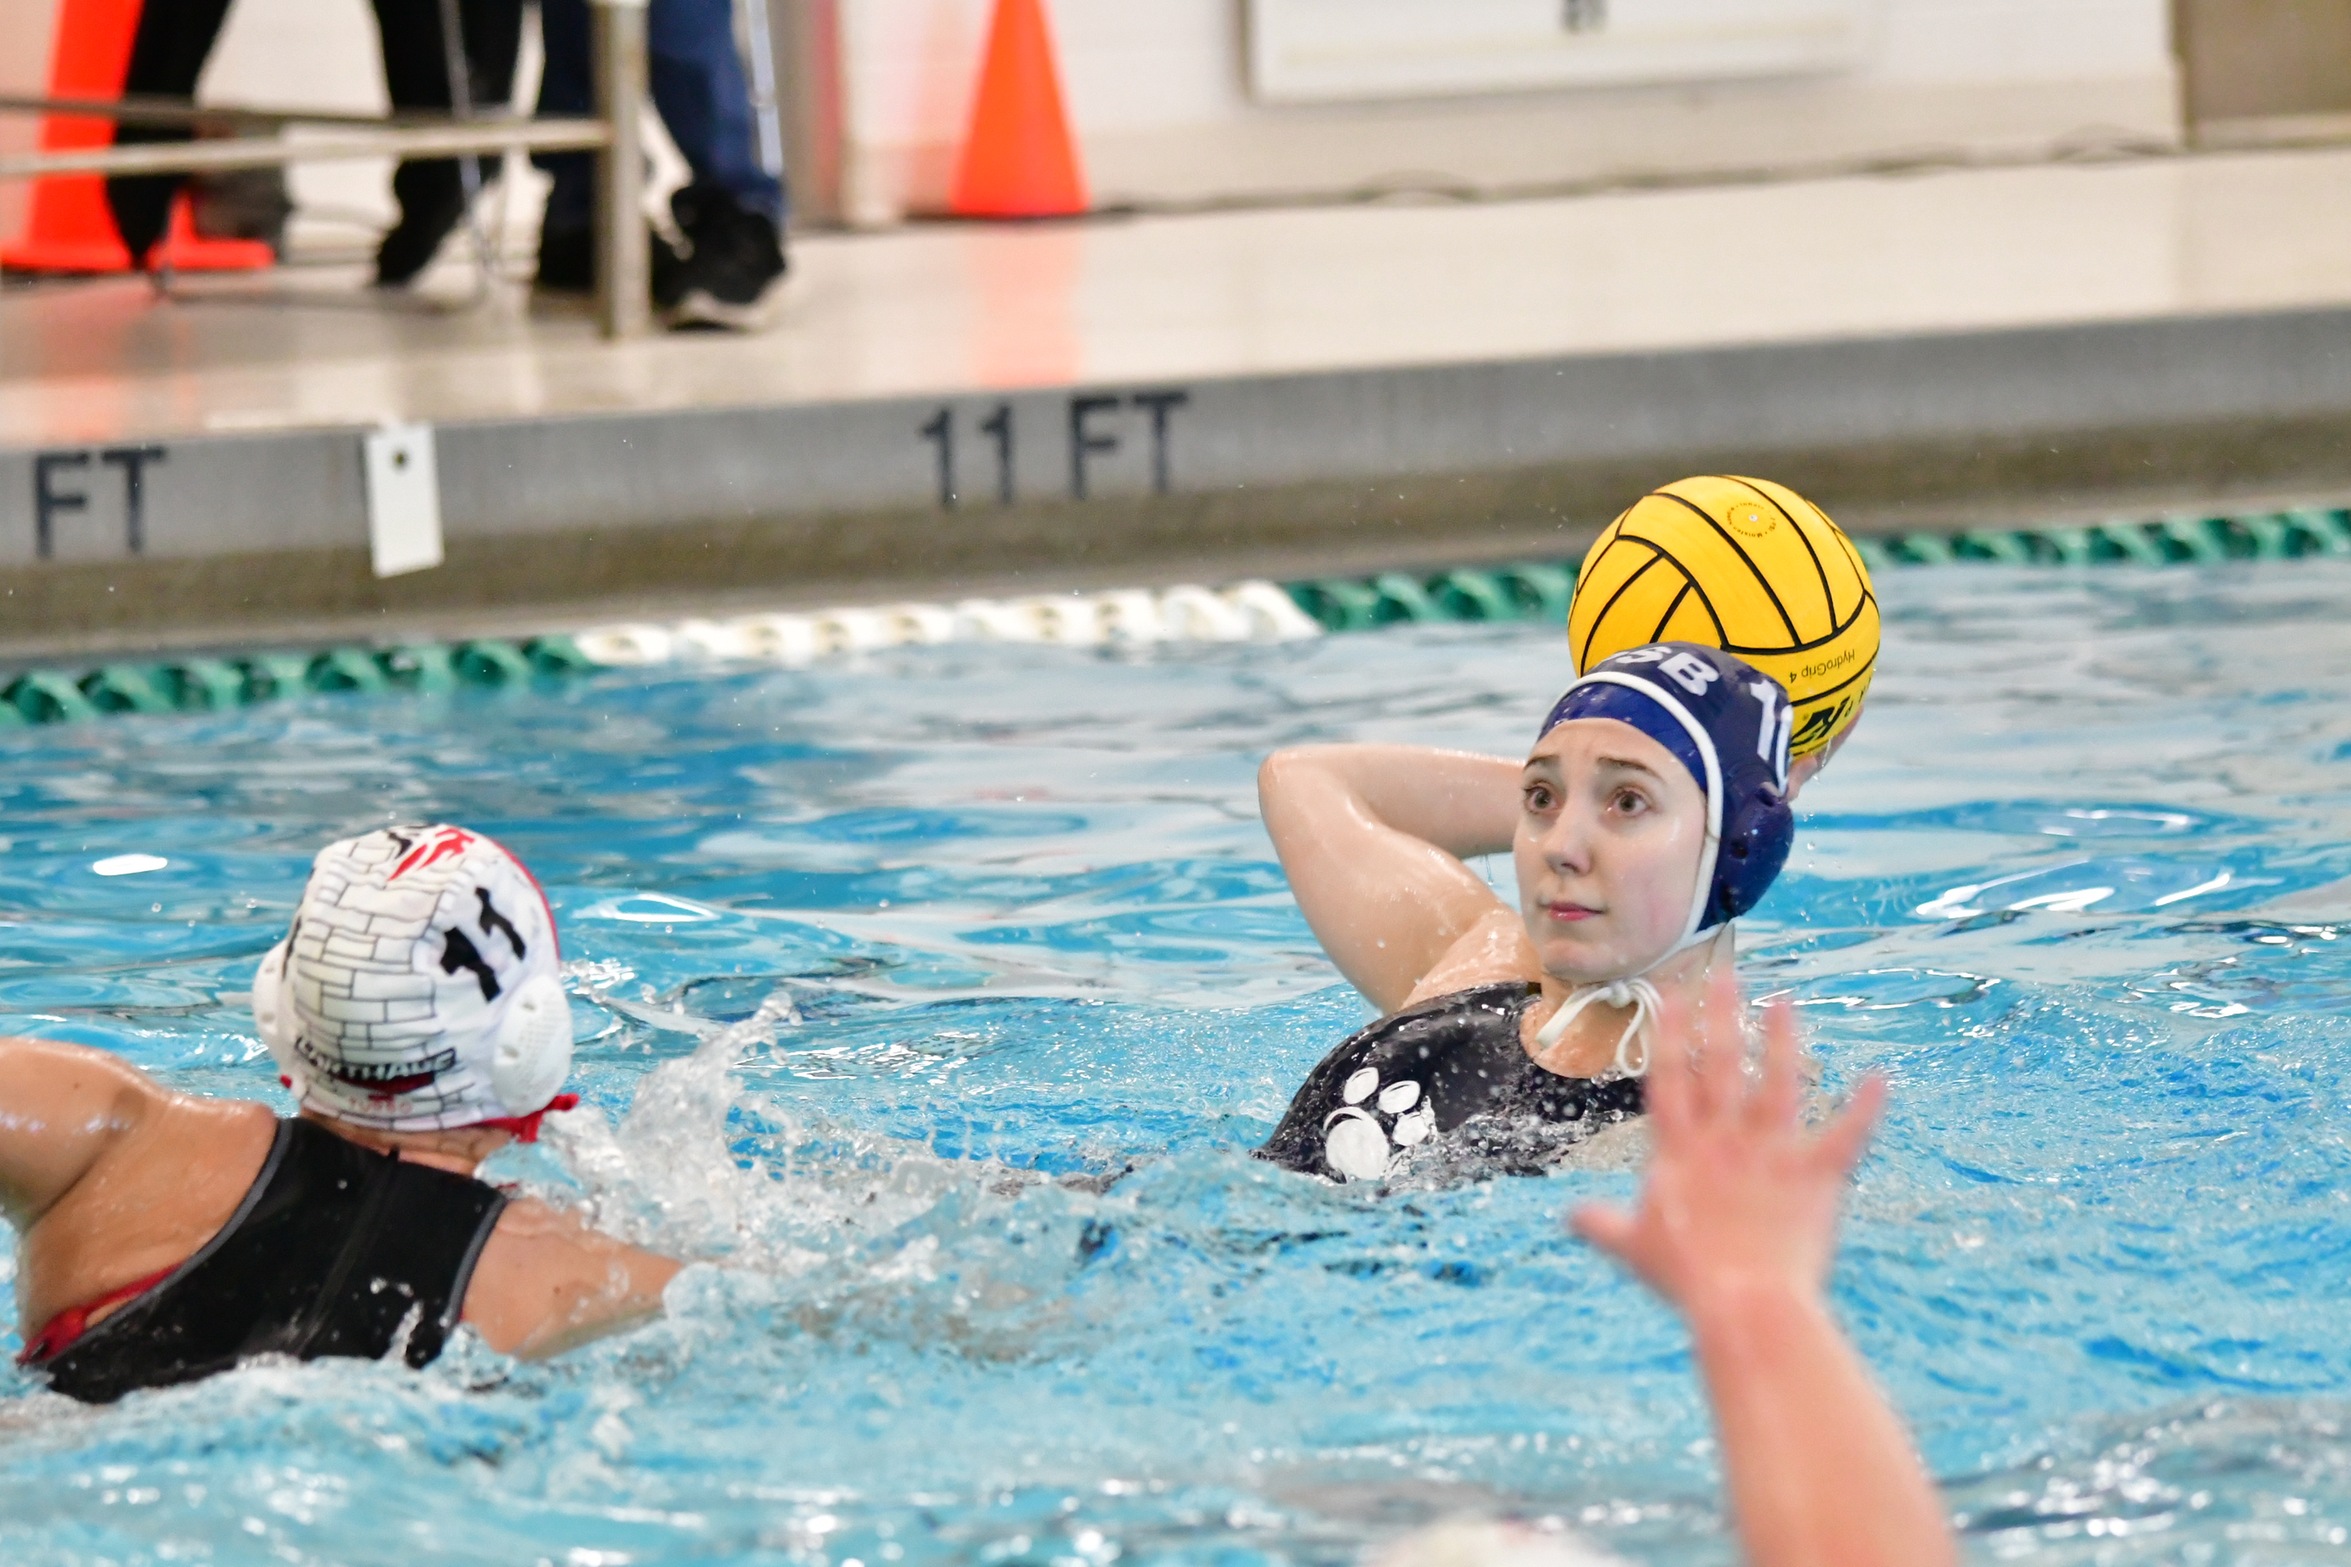 Women's Water Polo Ends Season With Victory Over Grove City; Martin Named To CWPA All-Tournament Team